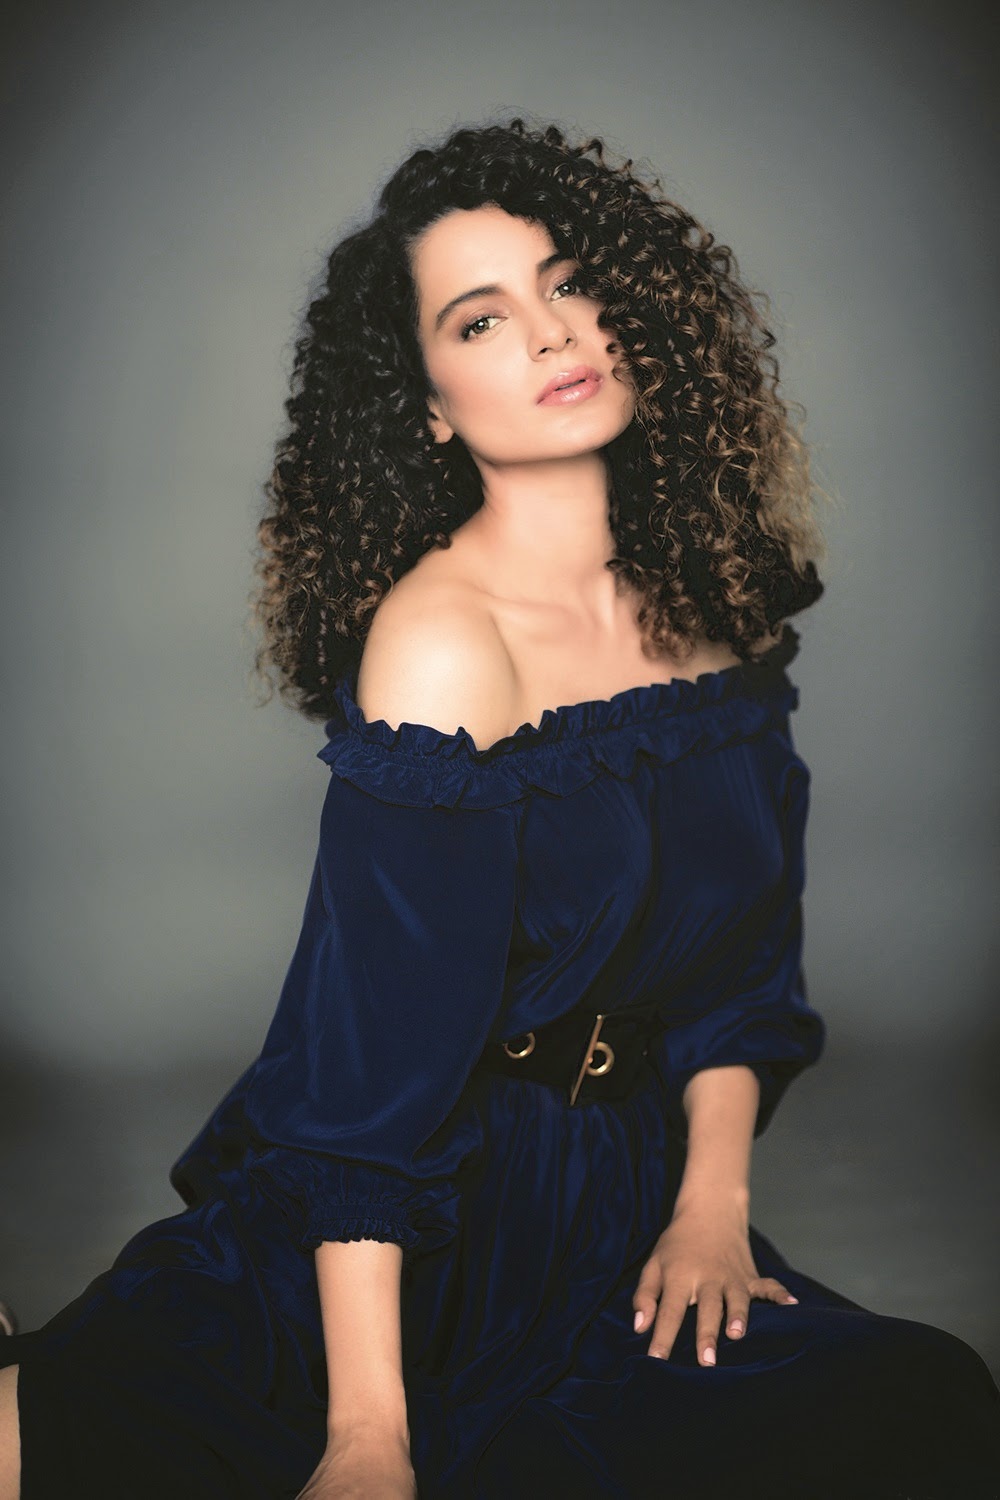 High Quality Bollywood Celebrity Pictures: Kangna Ranaut 